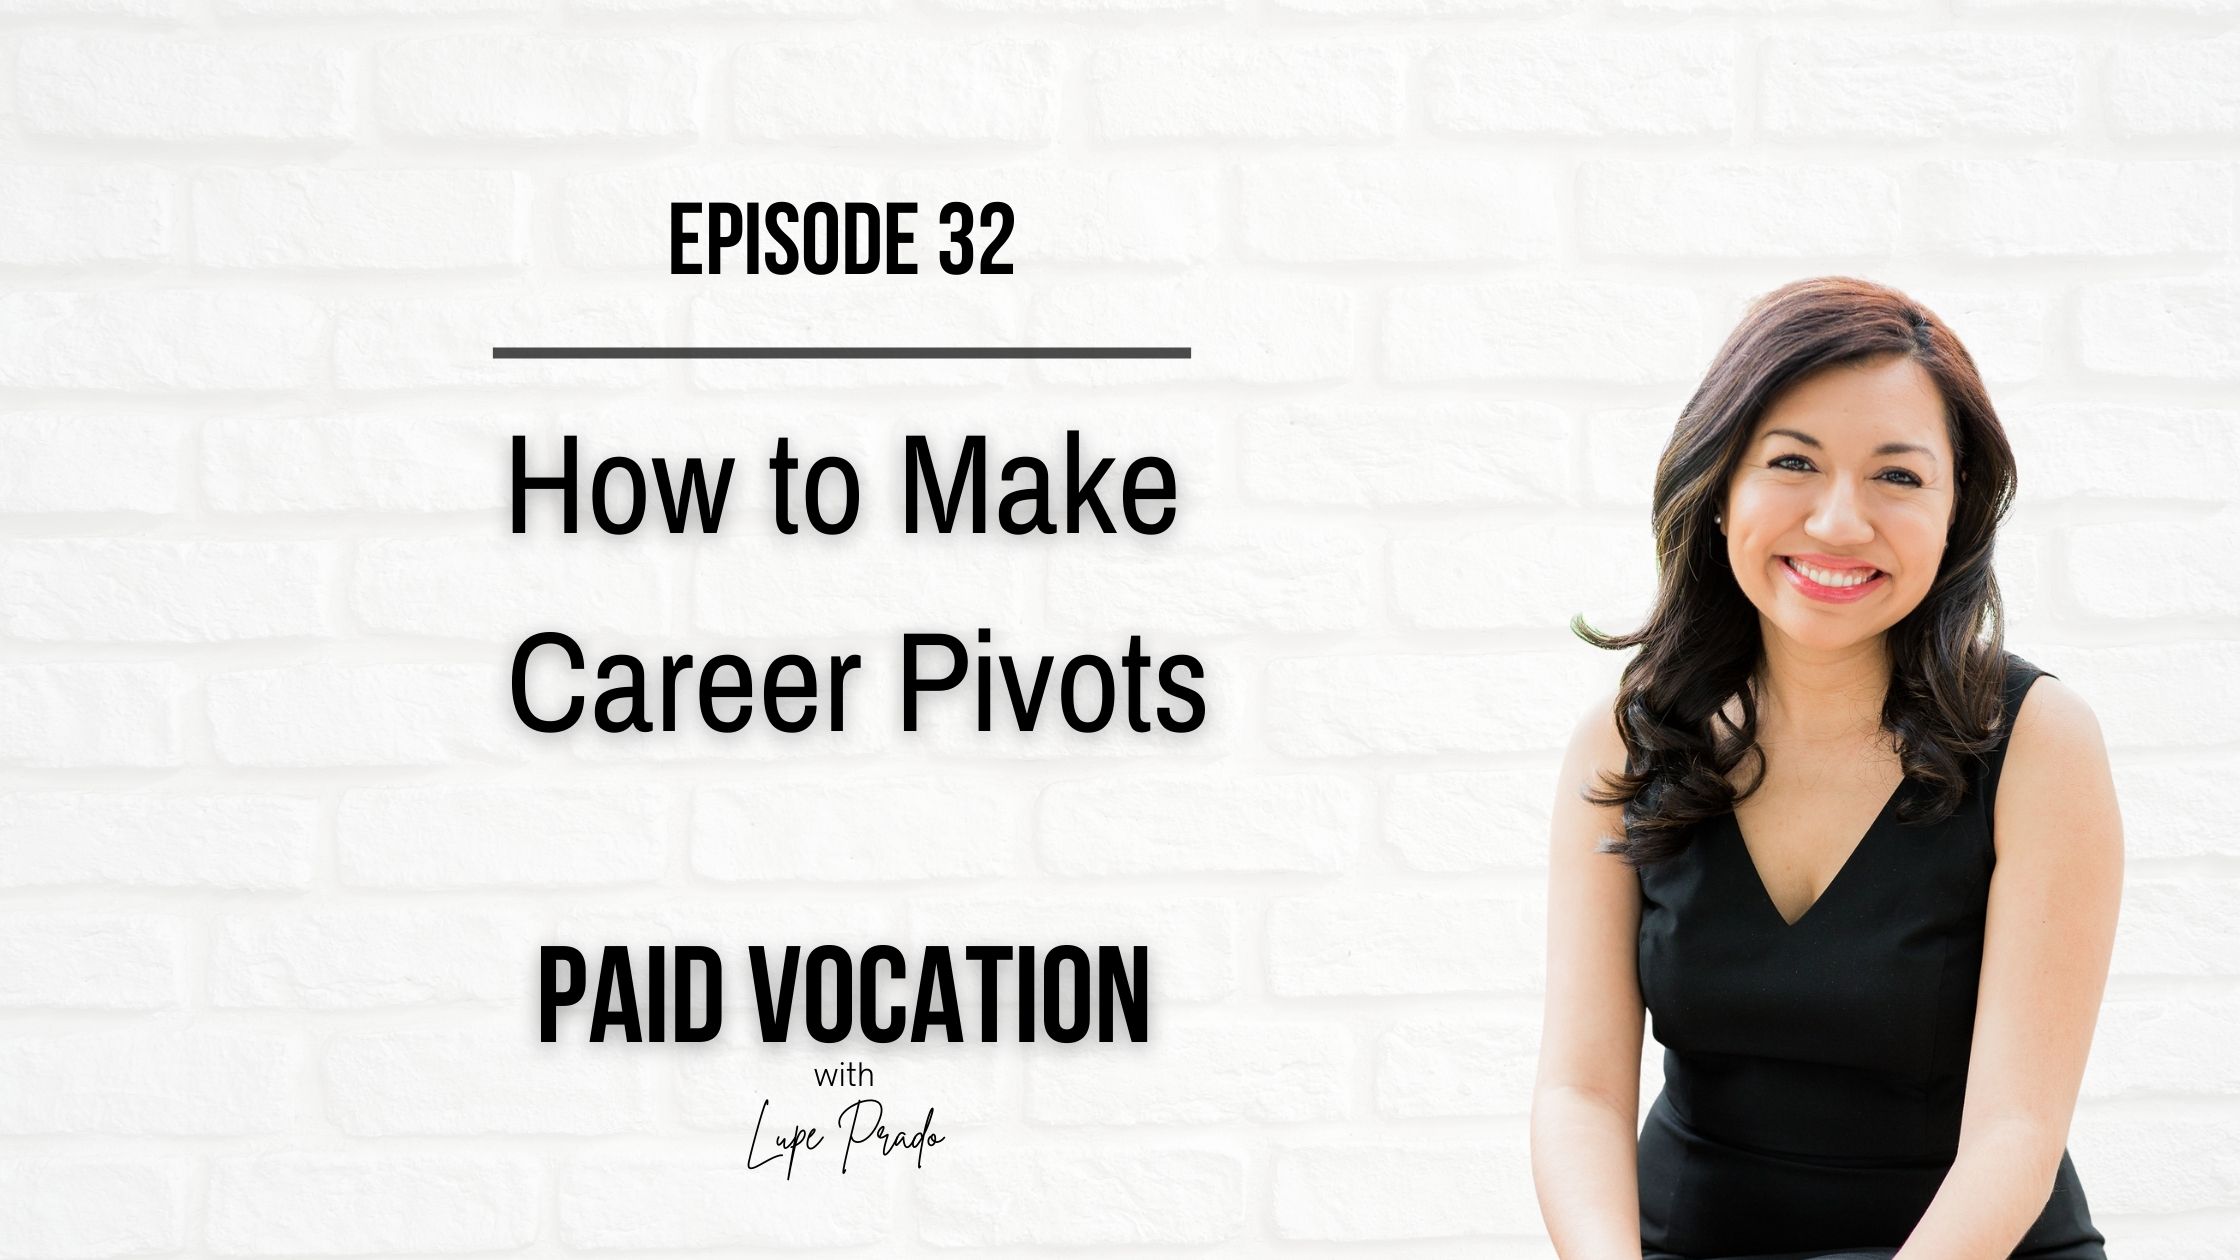 How to Make Career Pivots